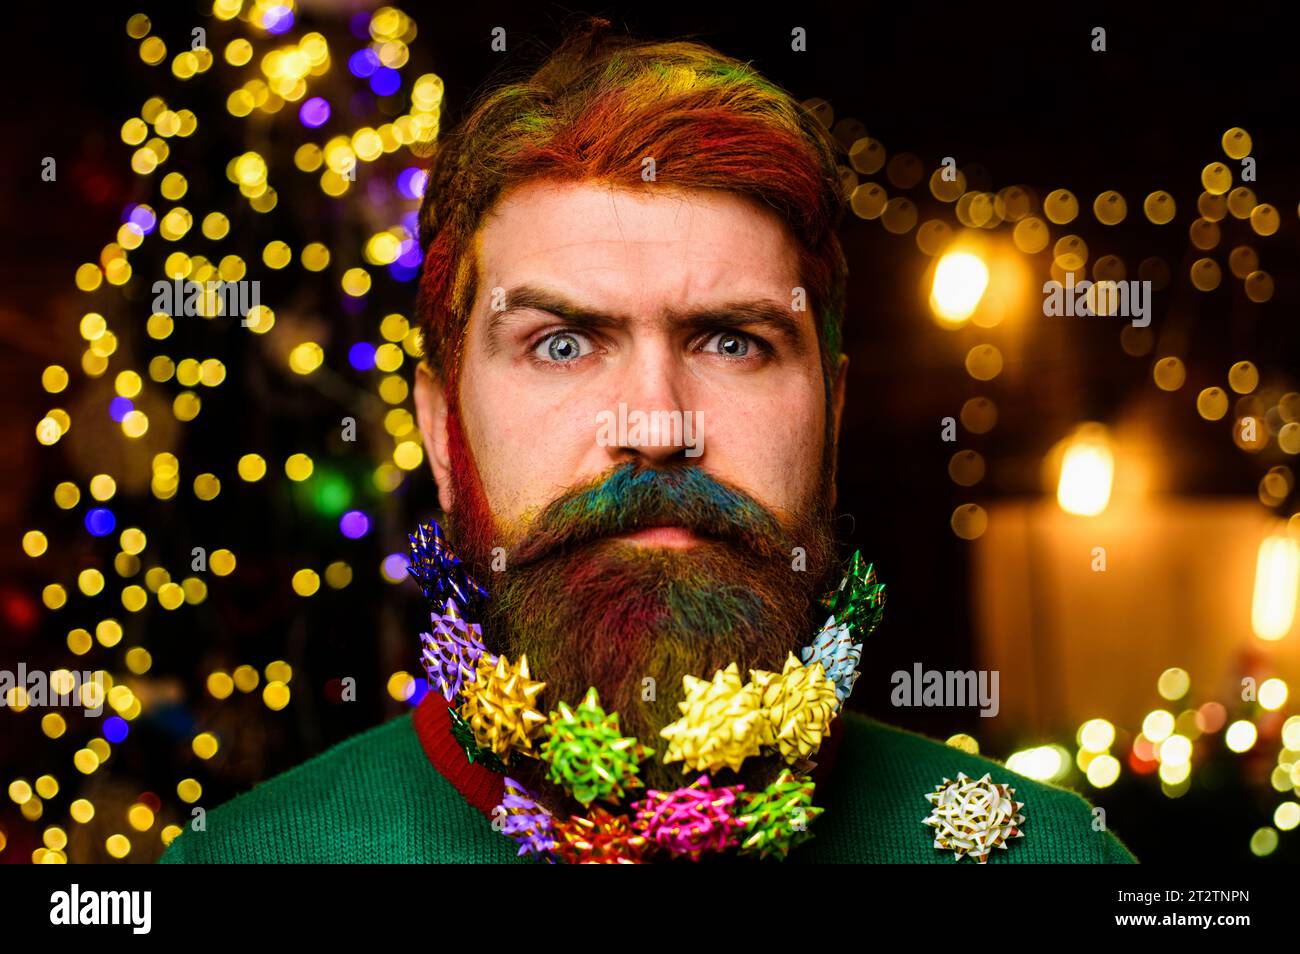 Merry Christmas and Happy new year. Christmas beard decoration. Serious bearded man with decorated beard. Bearded man with dyed hair and decorated Stock Photo